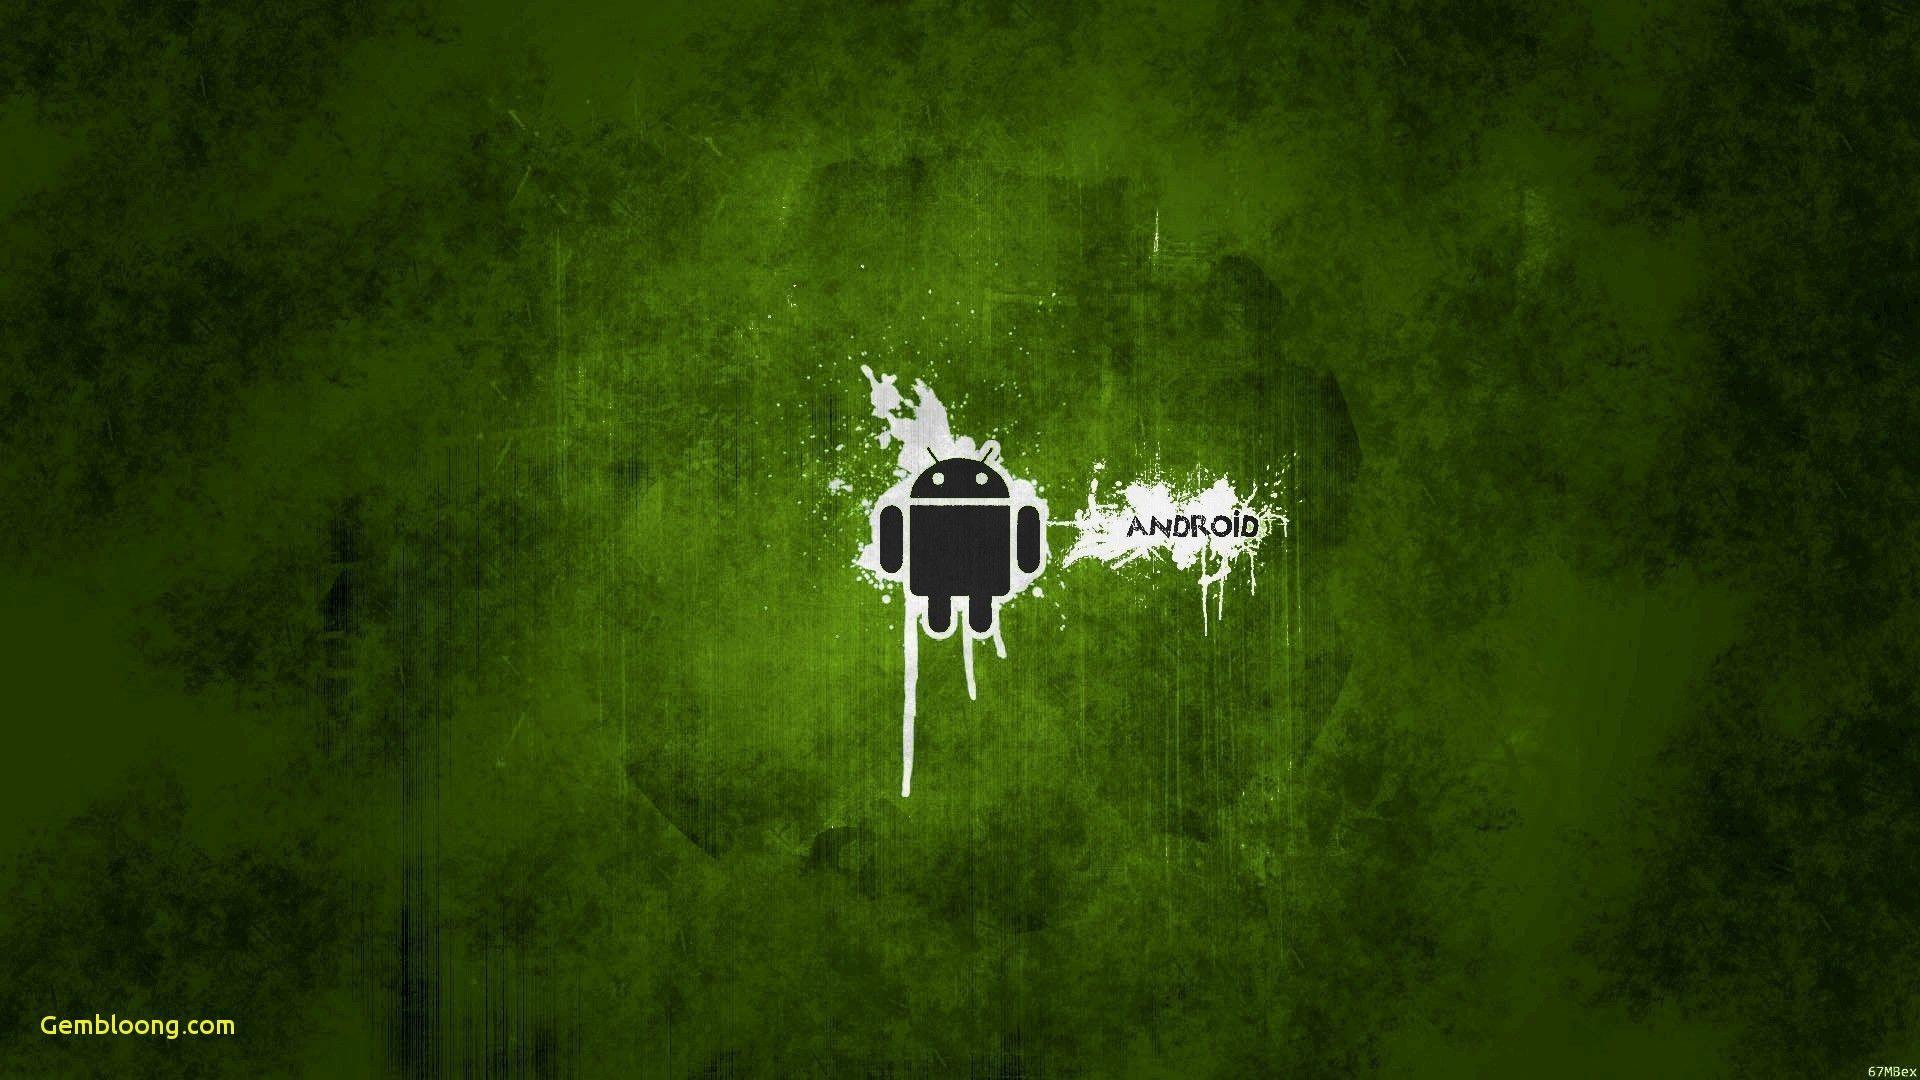 Hd Wallpaper for android Kitkat Awesome 63 android Background ·â